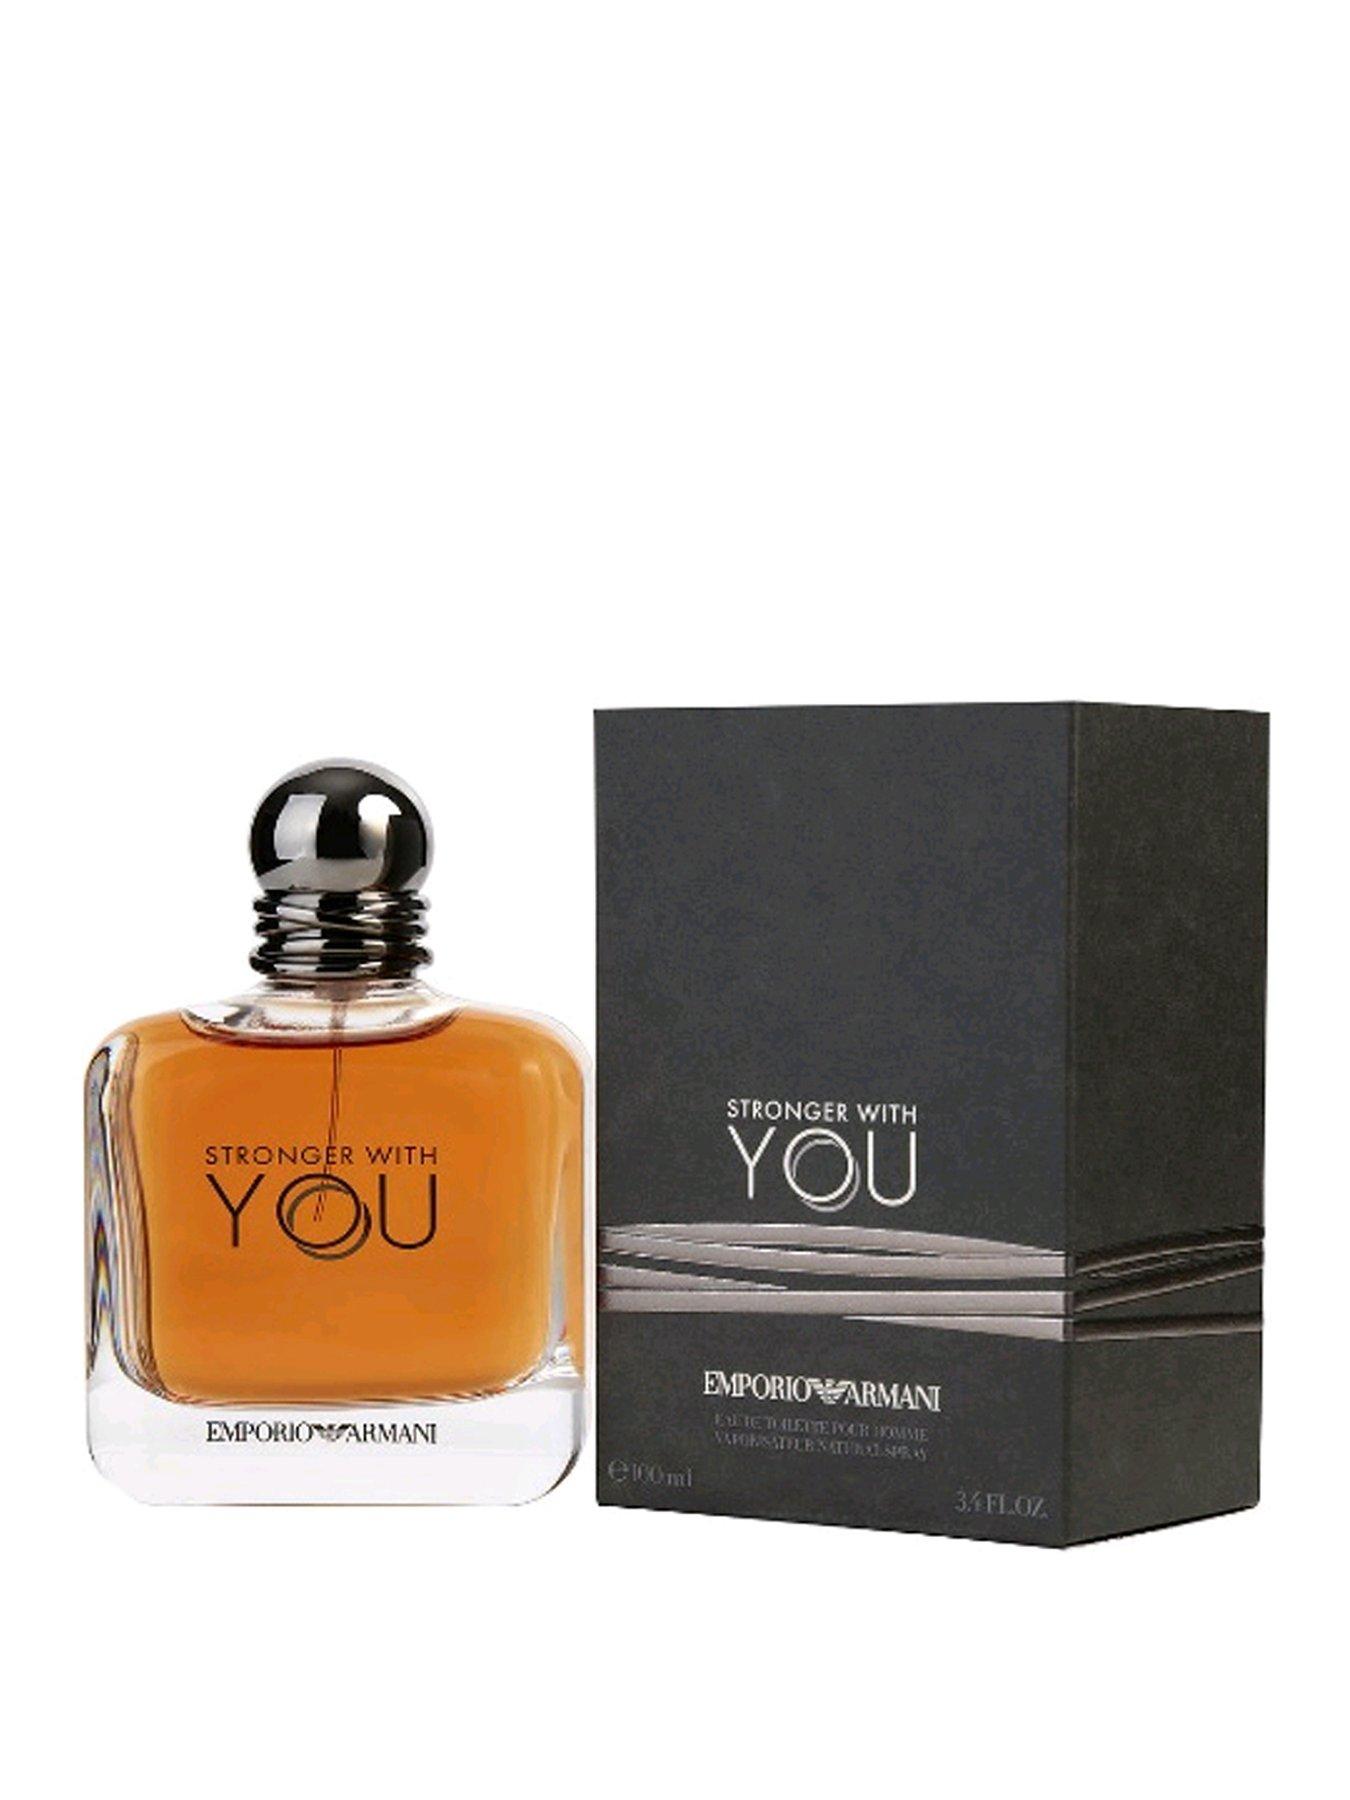 stronger with you 100 ml